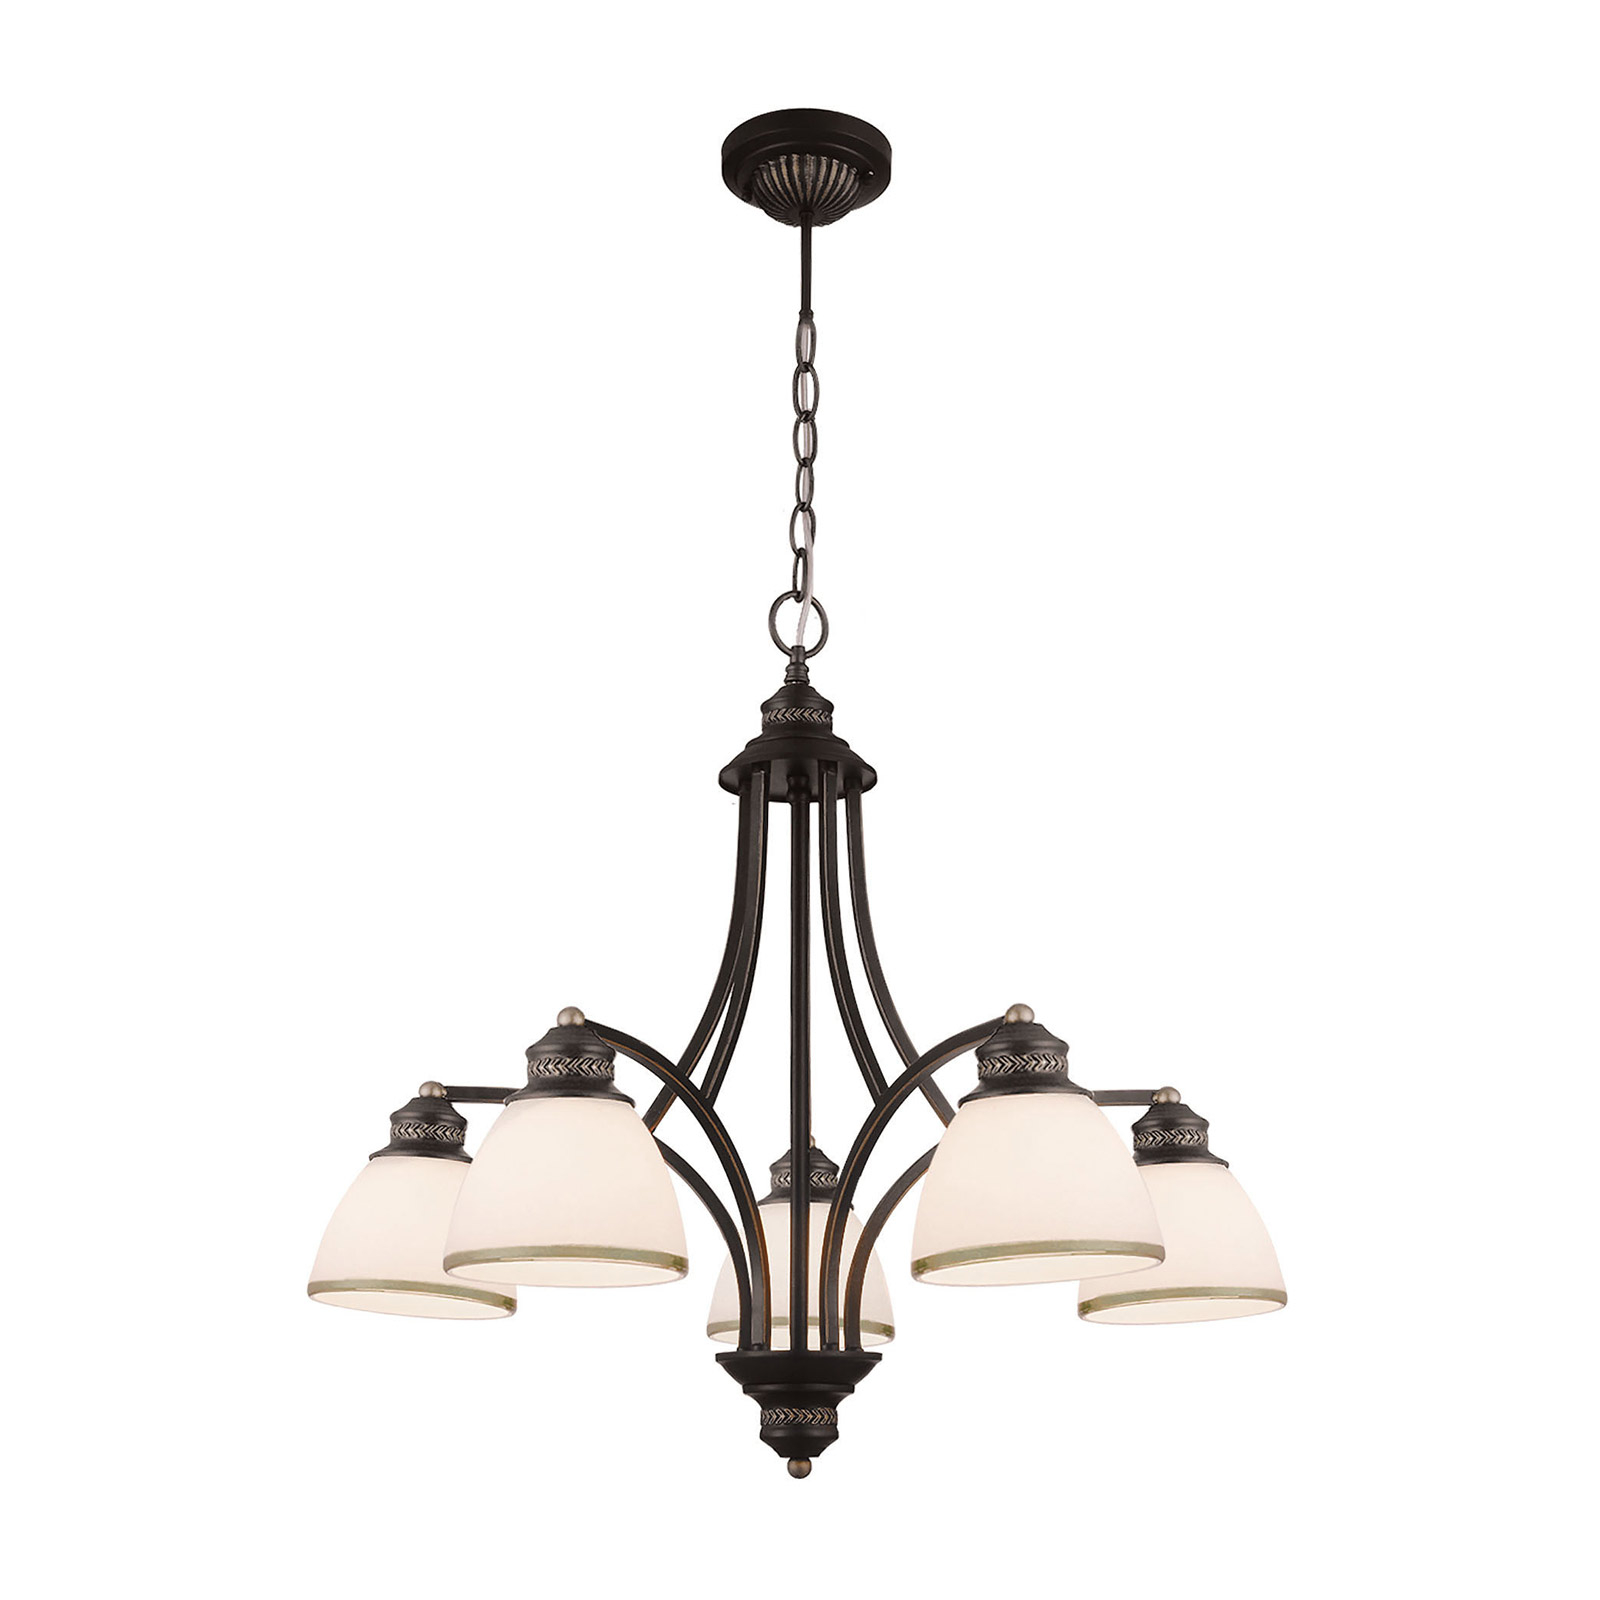 Clair - 5-bulb hanging light with glass shades